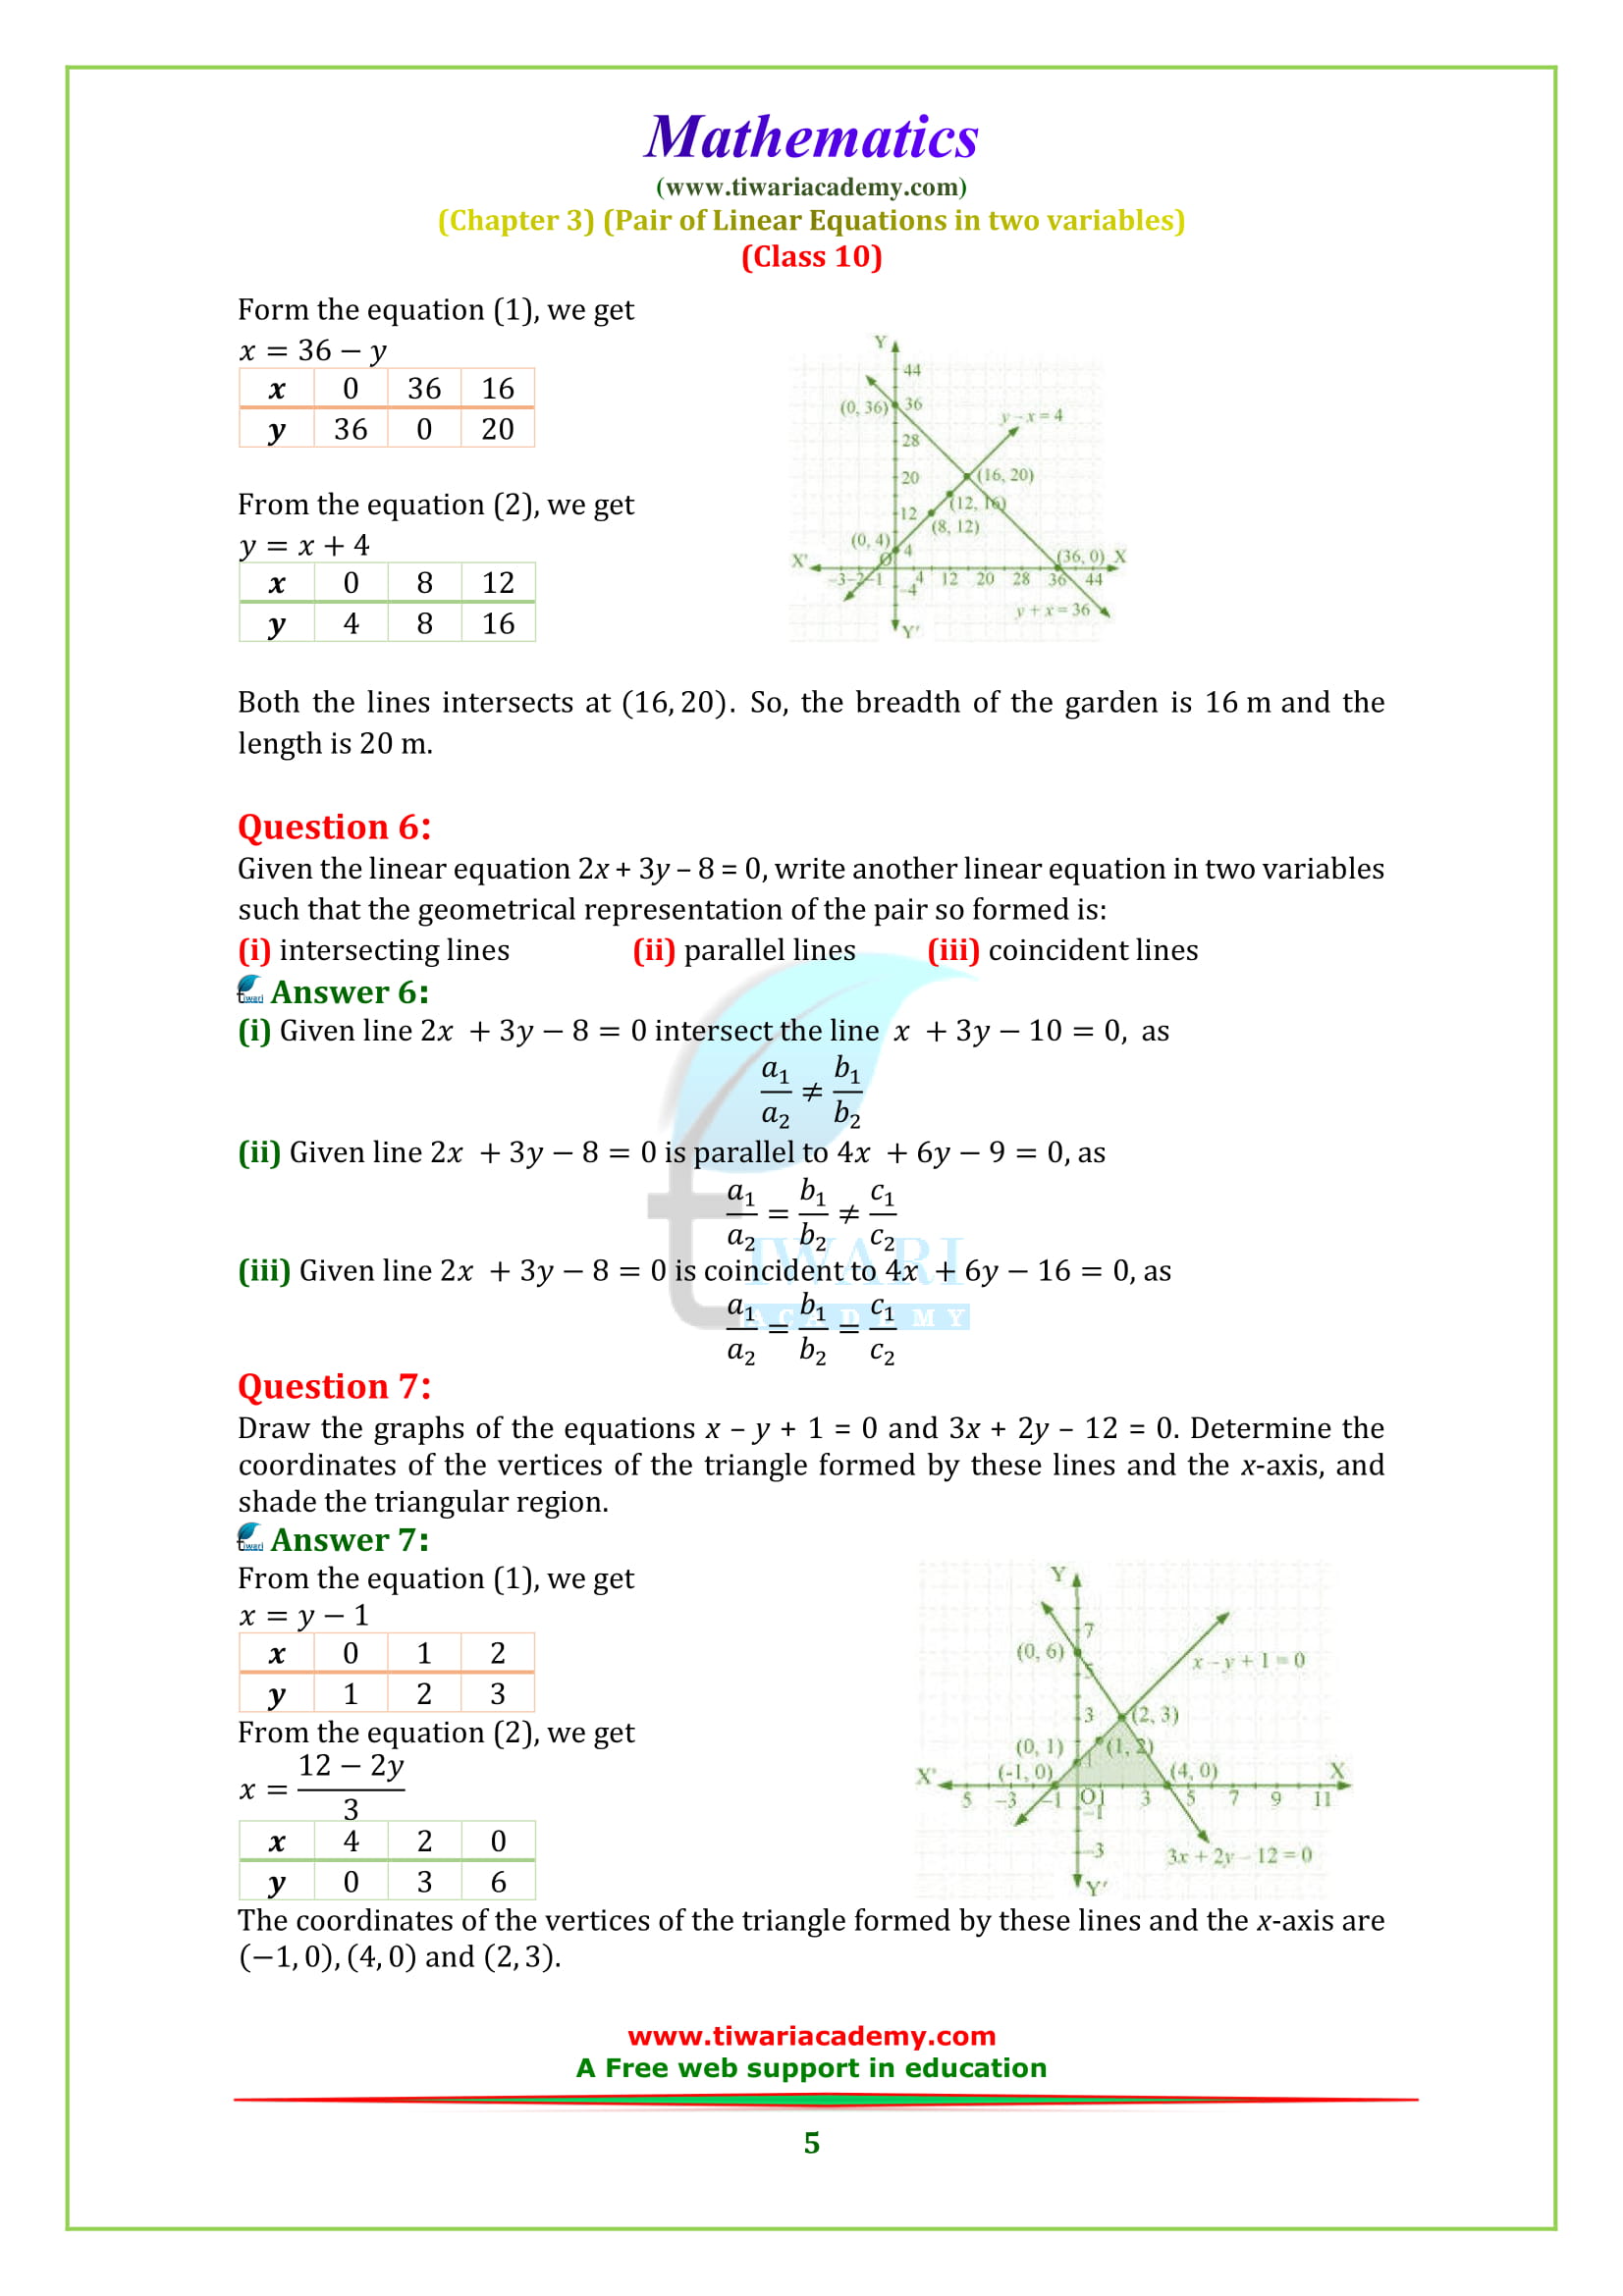 Class 10 Maths chapter 3 exercise 3.2 in English